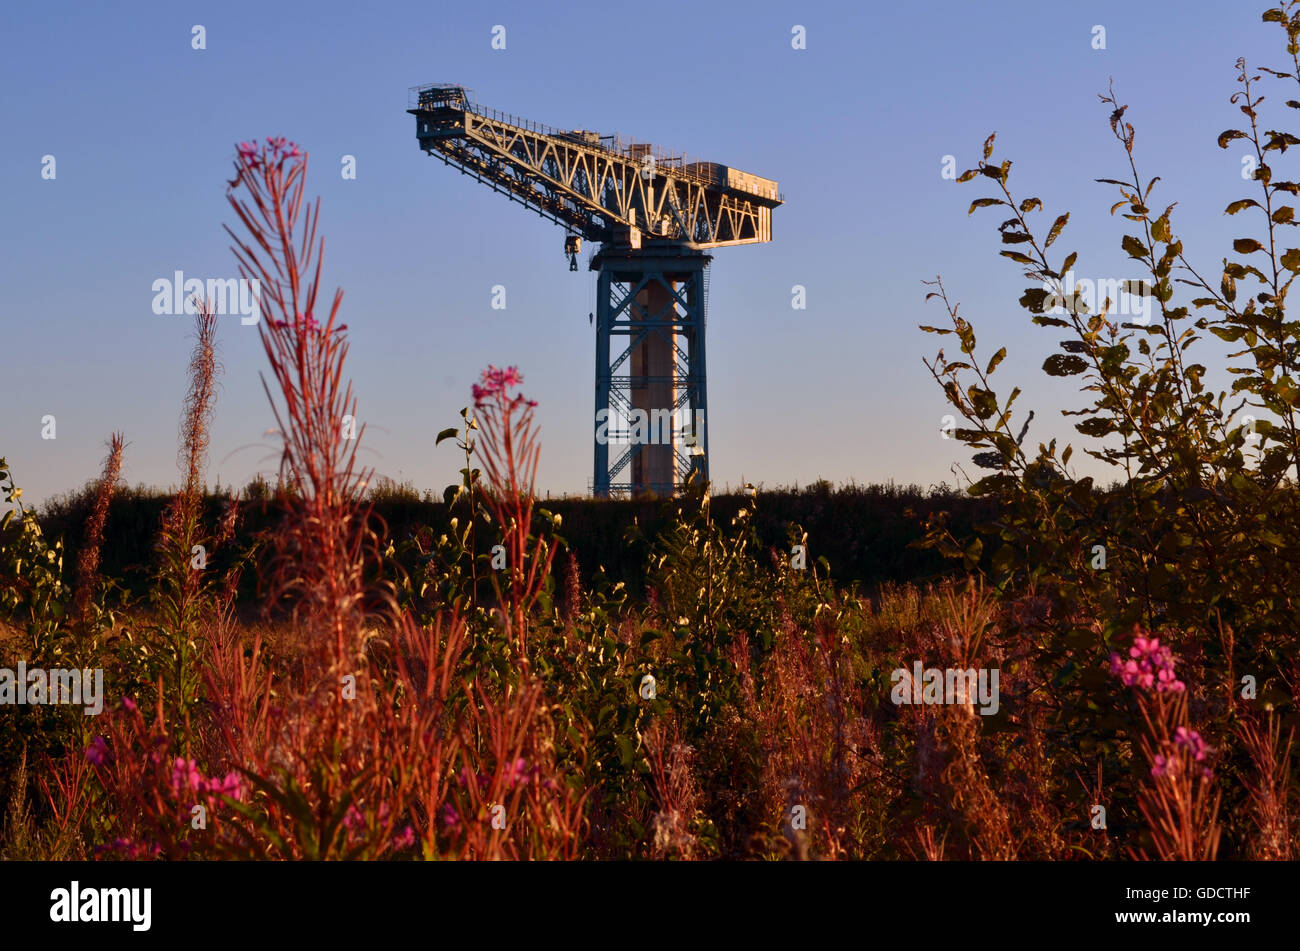 Titan in the Weeds. The Clydebank Titan Crane, all that is left of a once proud shipbuilding industry on the banks of the River Clyde Stock Photo